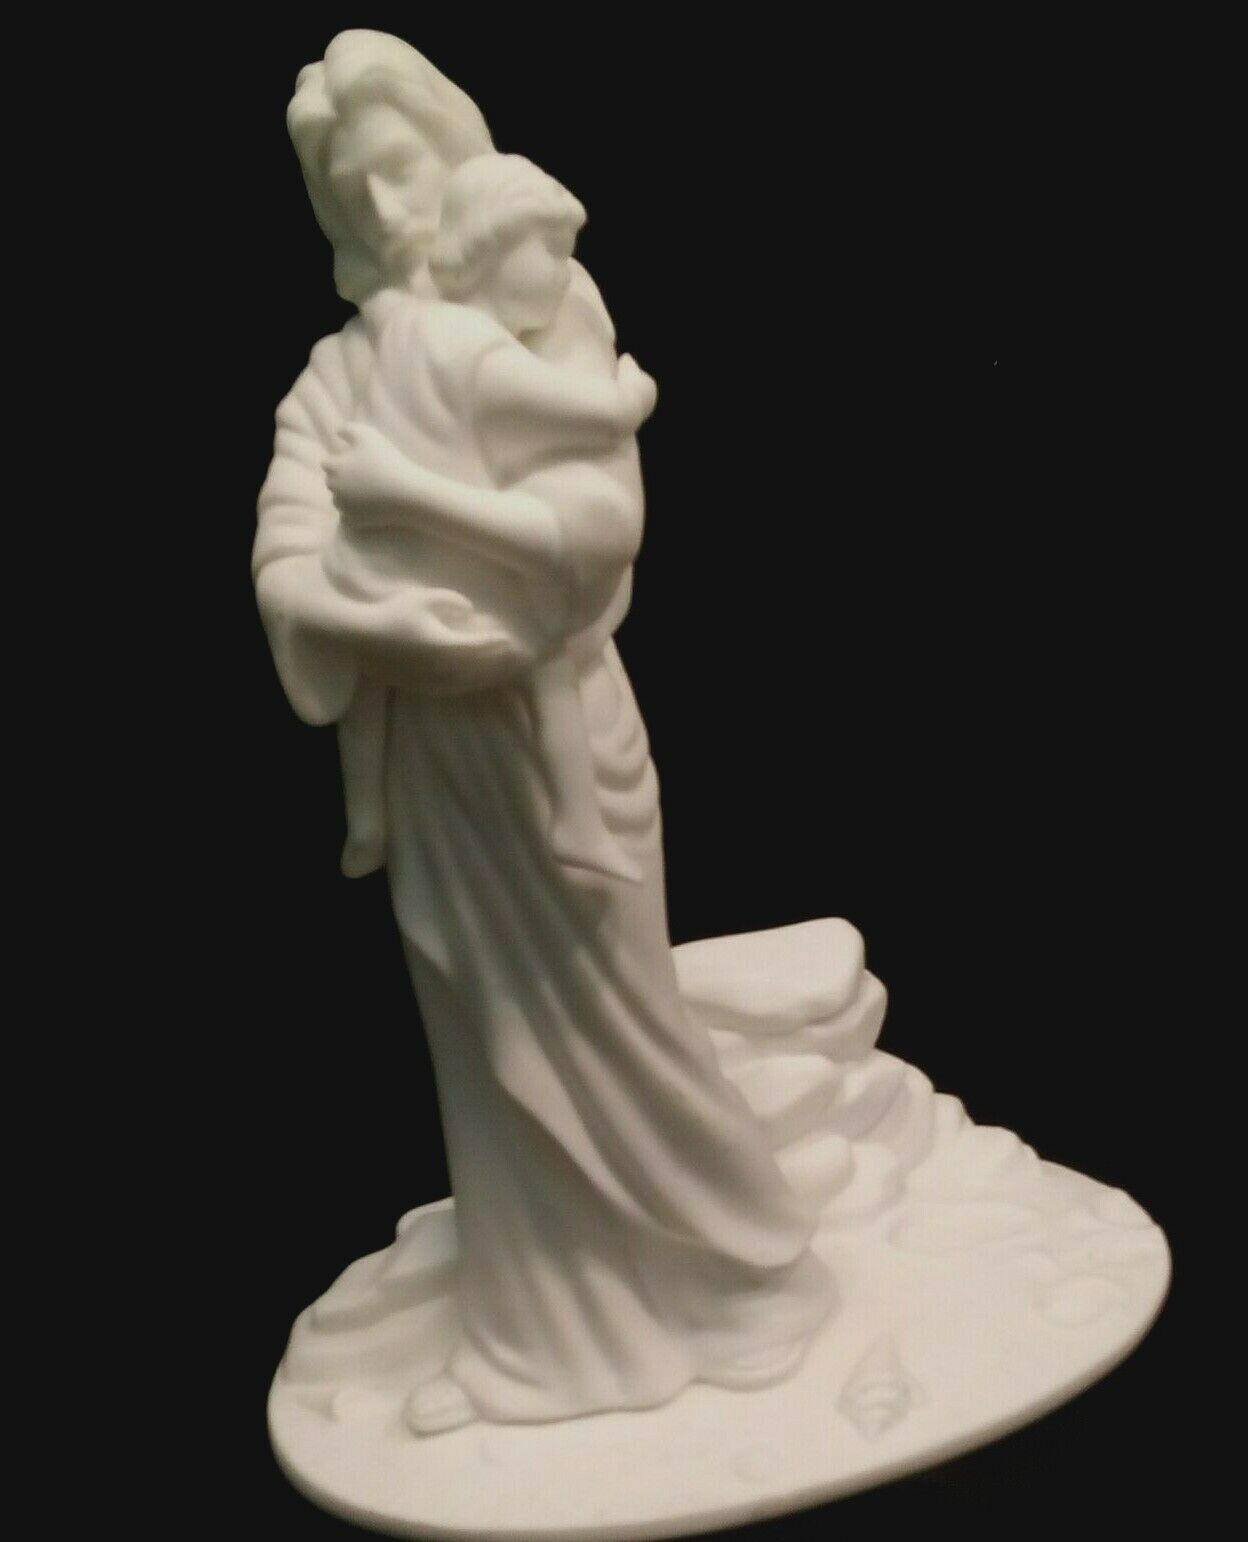 Lennox Foot Prints in the Sand - 1994 Religious Figure - Gift 